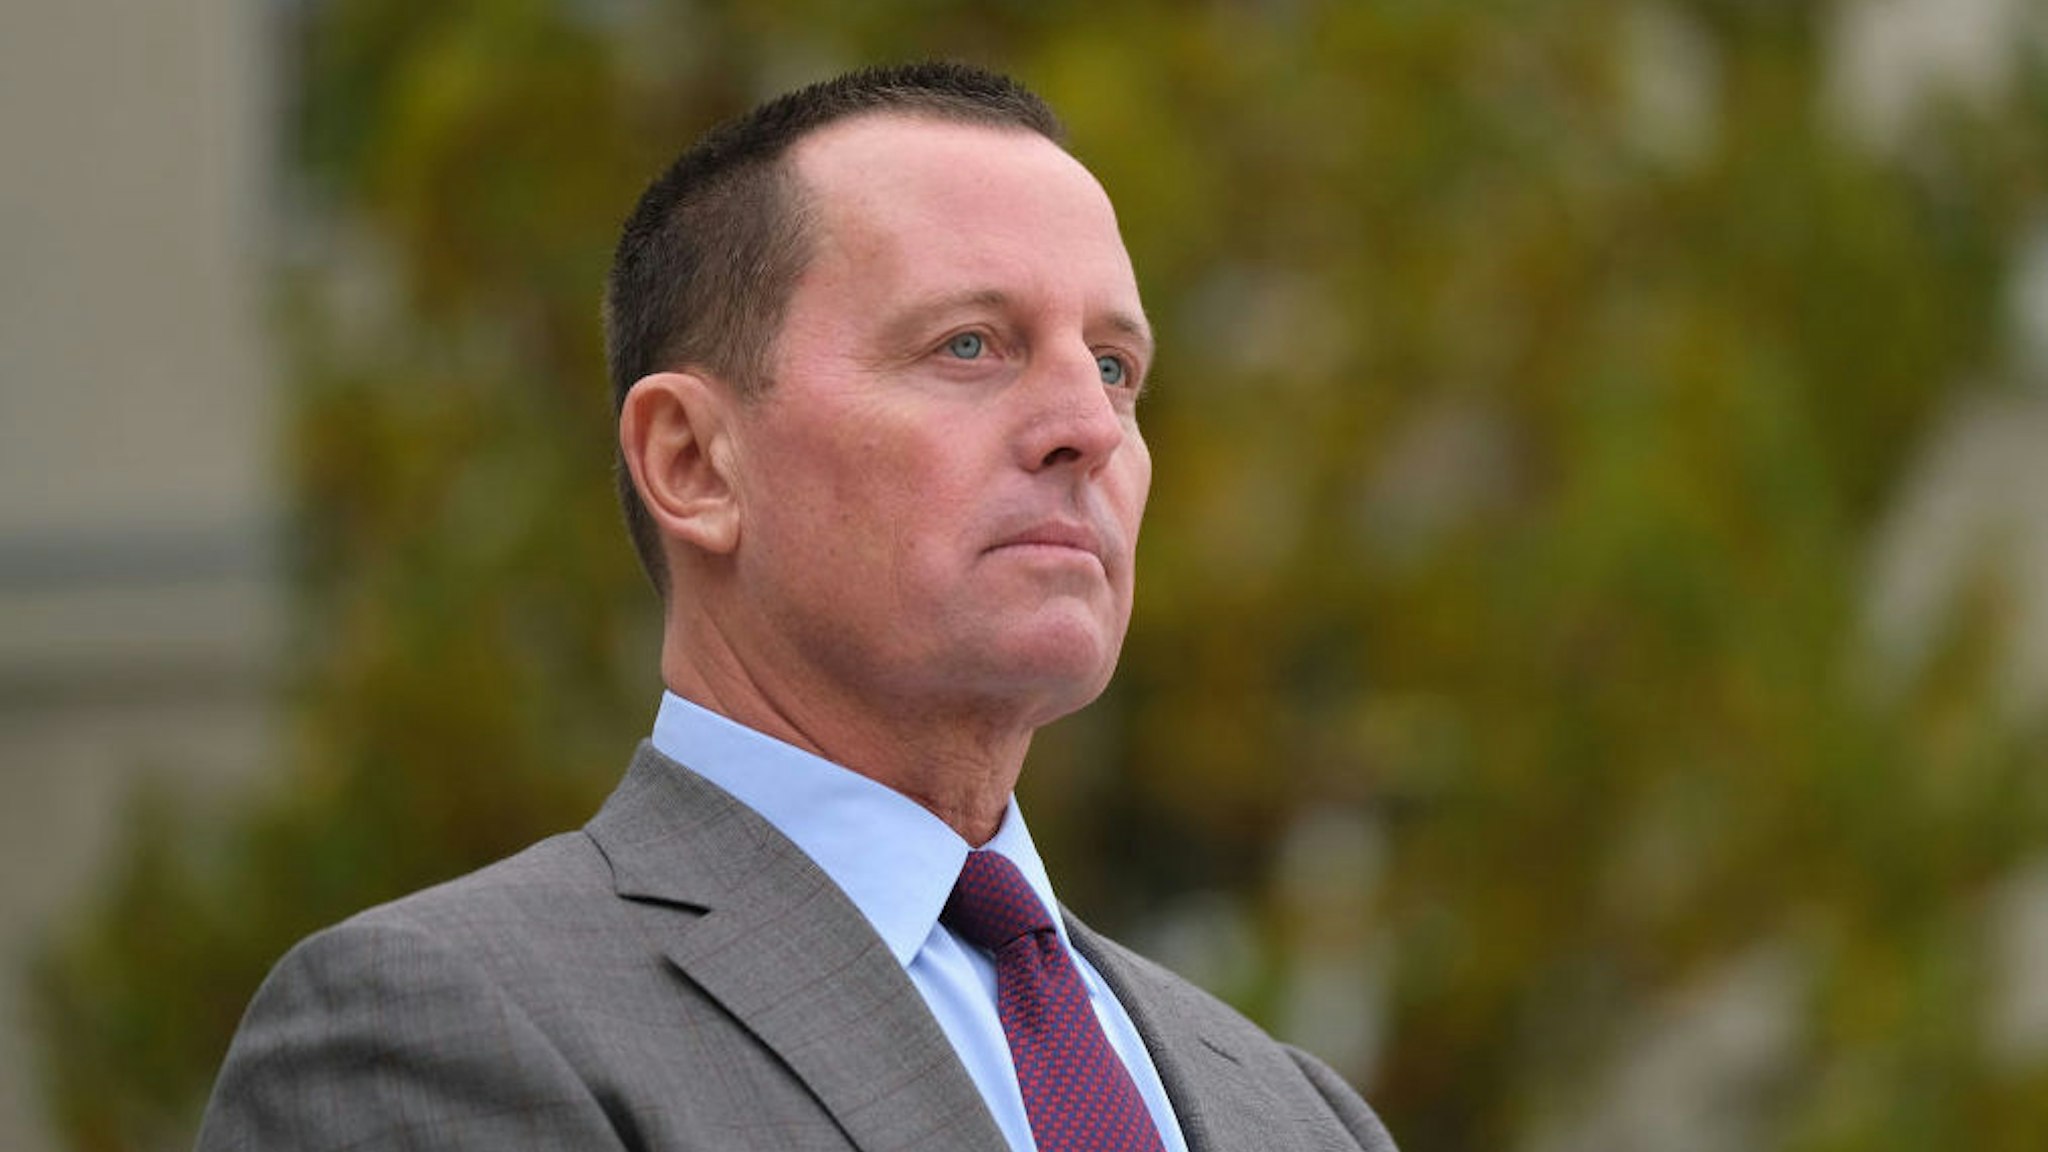 BERLIN, GERMANY - NOVEMBER 08: U.S. Ambassador to Germany Richard Grenell waits for the arrival of U.S. Secretary of State Mike Pompeo for talks with German Defense Minister Annegret Kramp-Karrenbauer at the Federal Defense Ministry on November 08, 2019 in Berlin, Germany. Pompeo is on a two-day visit to Germany ahead of the 30th anniversary of the fall of the Berlin Wall.